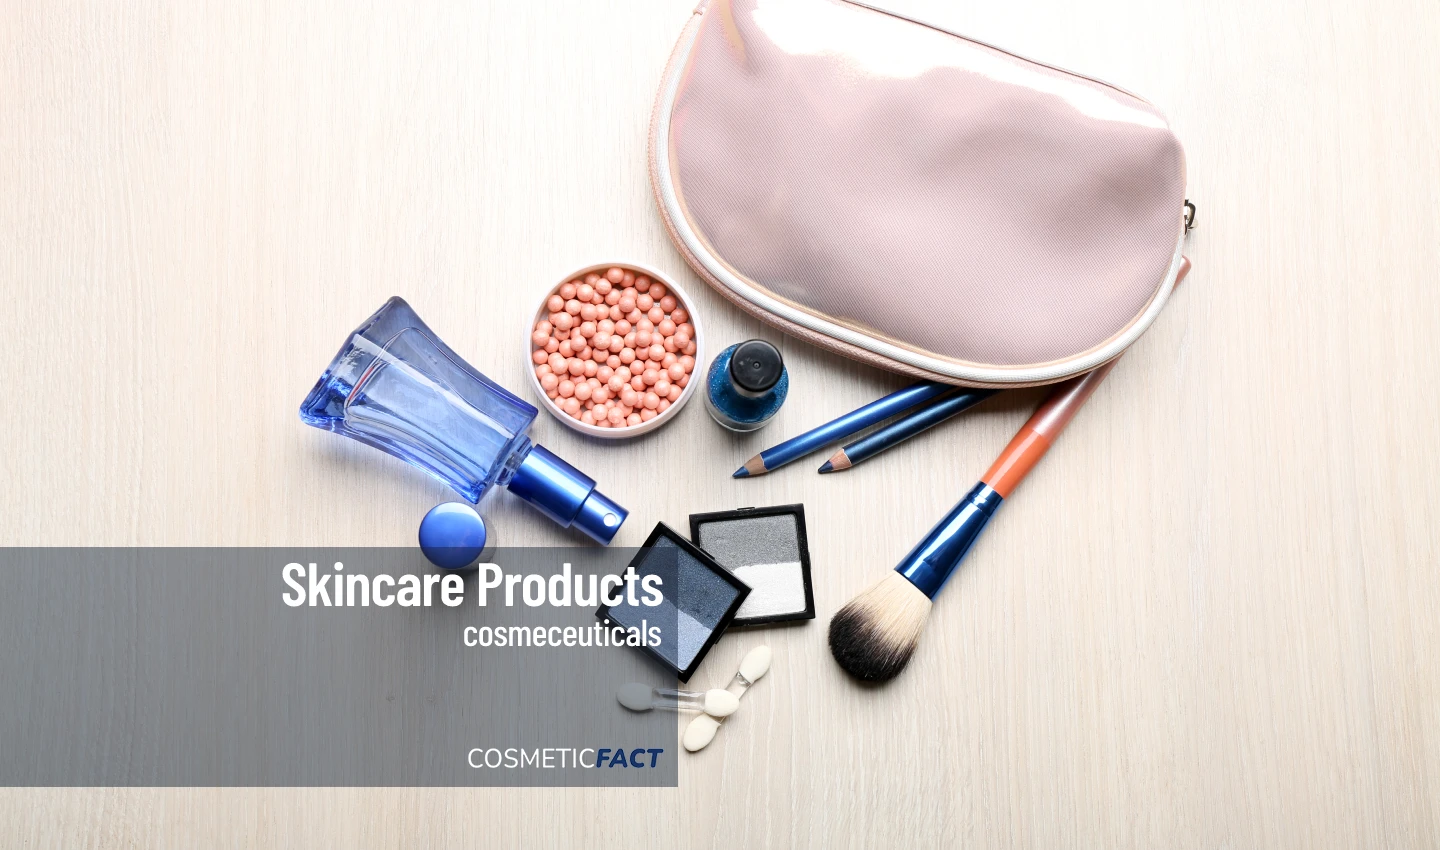 A makeup kit featuring various products and skincare mists, including foundation, eyeliner, mascara, and lipstick. These products can be used together to make your makeup last longer.